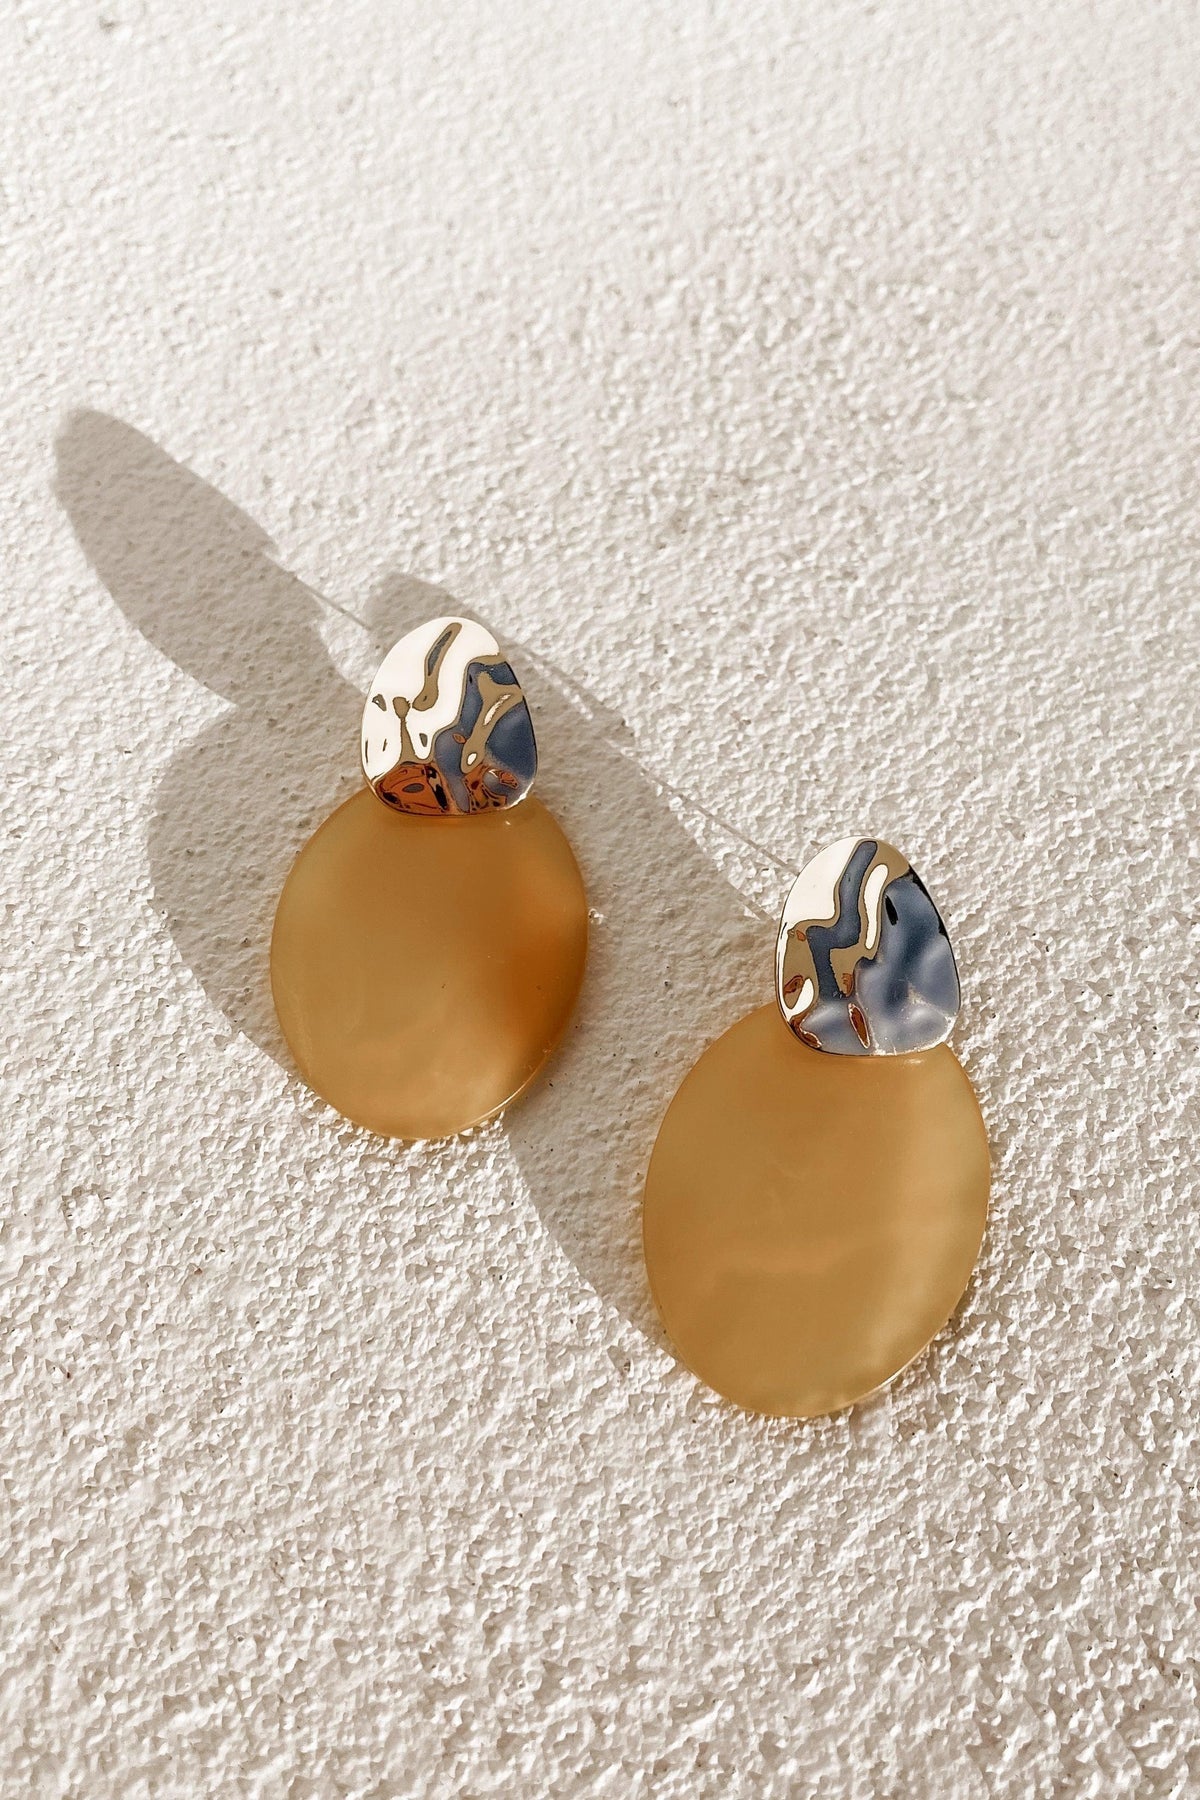 Marika Earrings, ACCESSORIES, EARRINGS, GOLD, JEWELLERY, NEW ARRIVALS, YELLOW, Our New Marika Earrings Is Now Only $33.00 Exclusive At Mishkah, We Have The Latest Fashion Accessories @ Mishkah Online Fashion Boutique Our New Marika Earrings is now only $33.00-MISHKAH